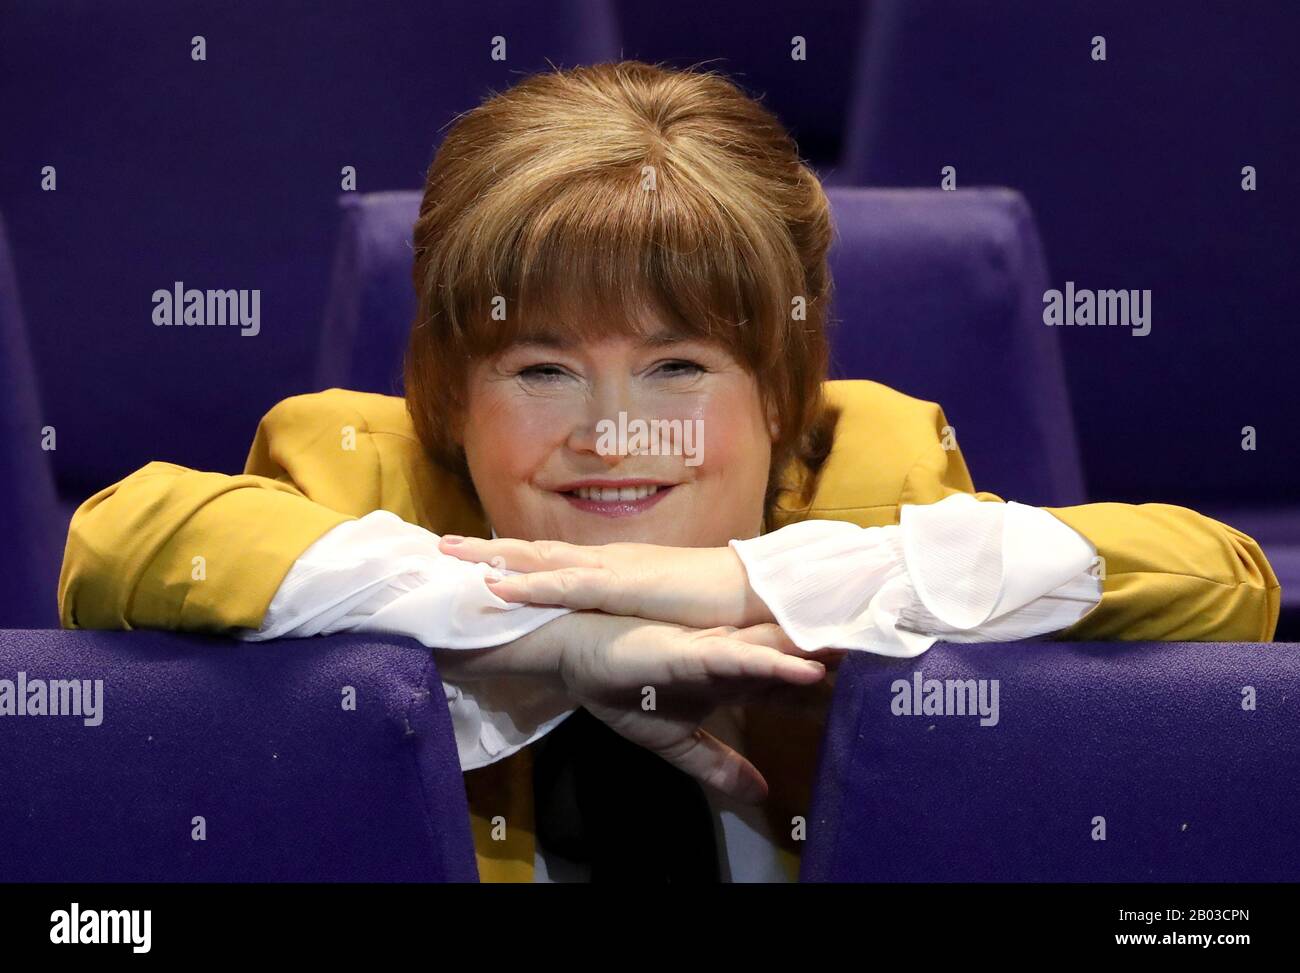 Susan Boyle at the SEC Armadillo in Glasgow to promote her 'Ten Tour', after she astonished the judges and audience at Britain's Got Talent during an audition at the Armadillo ten years ago. The tour starts on 4th March when she returns to the venue. Stock Photo